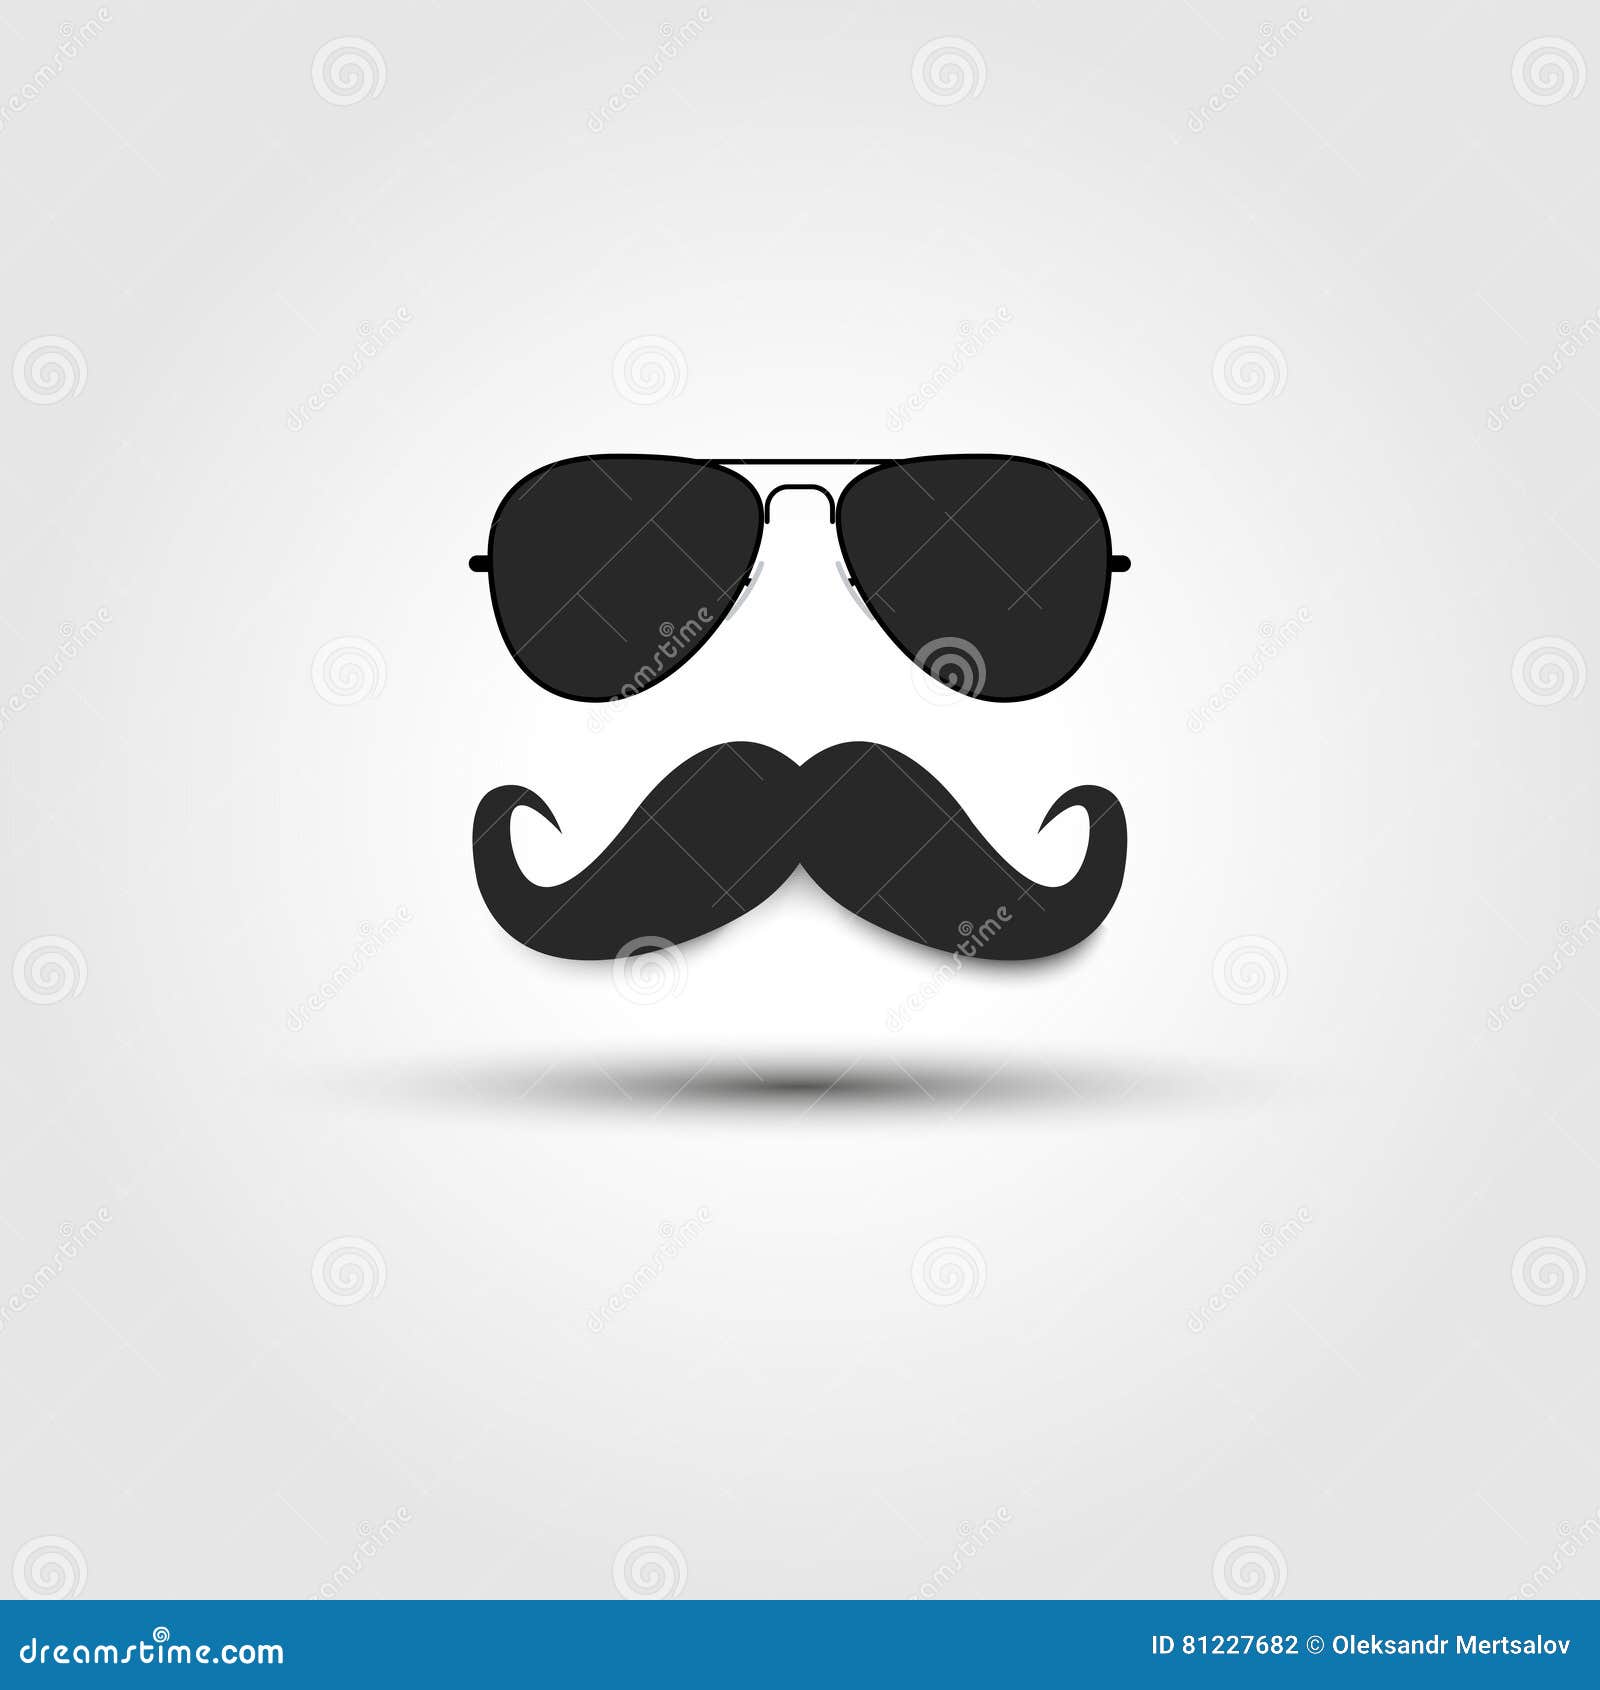 Glasses Mustache Butterfly Tie Background Abstract Illustration Stock Vector Illustration Of